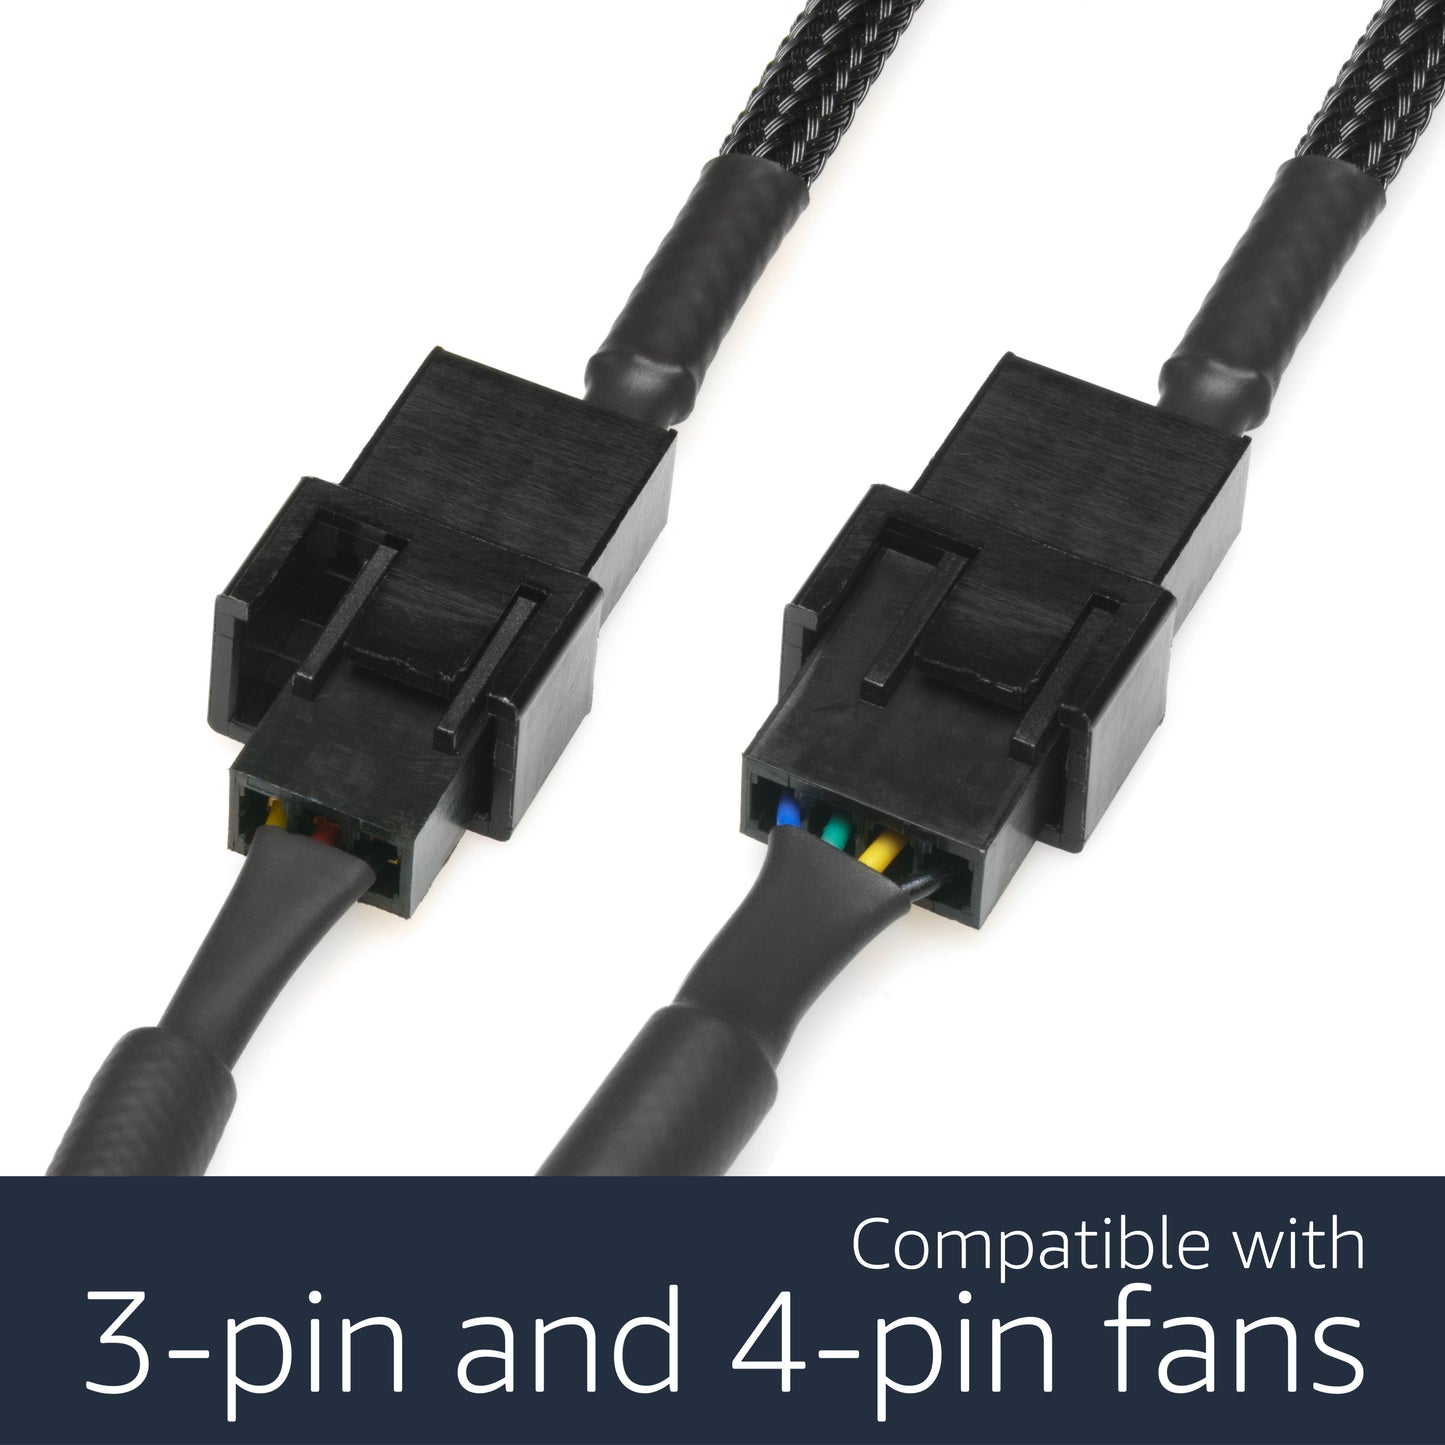 Micro PH 2-Pin Fan Adapter Cable